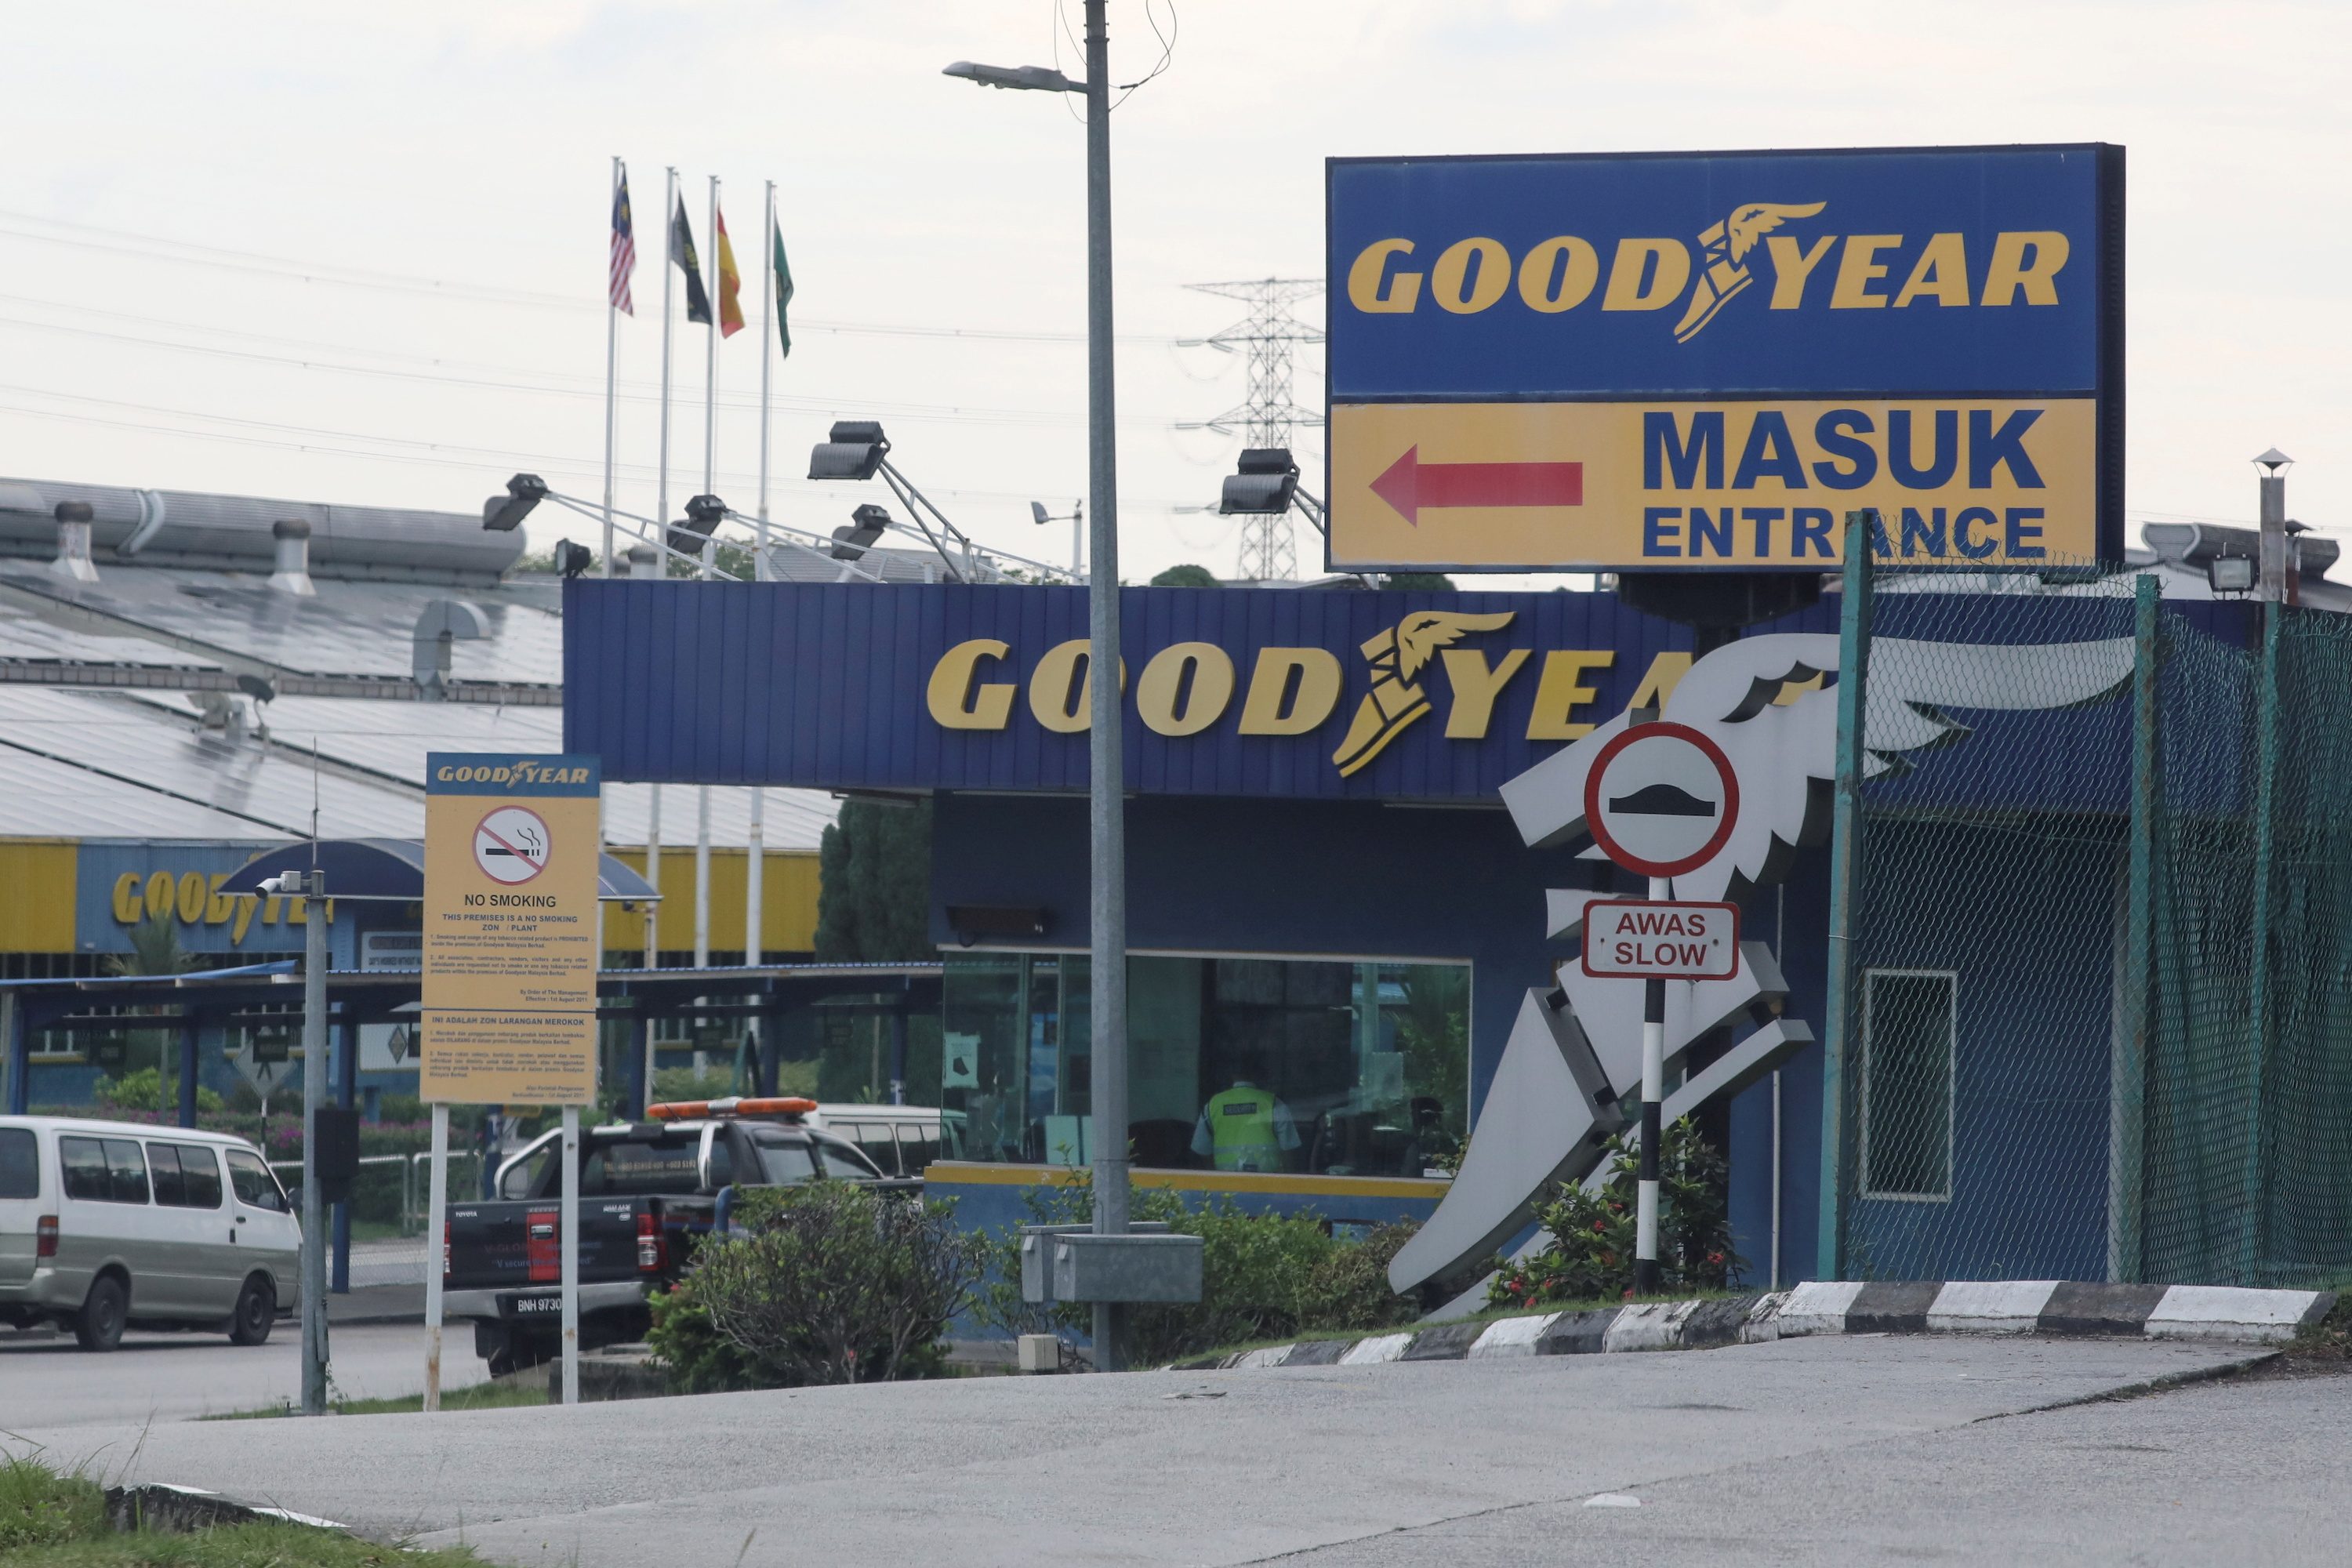 US tire maker Goodyear faces labor abuse allegations in Malaysia, documents show